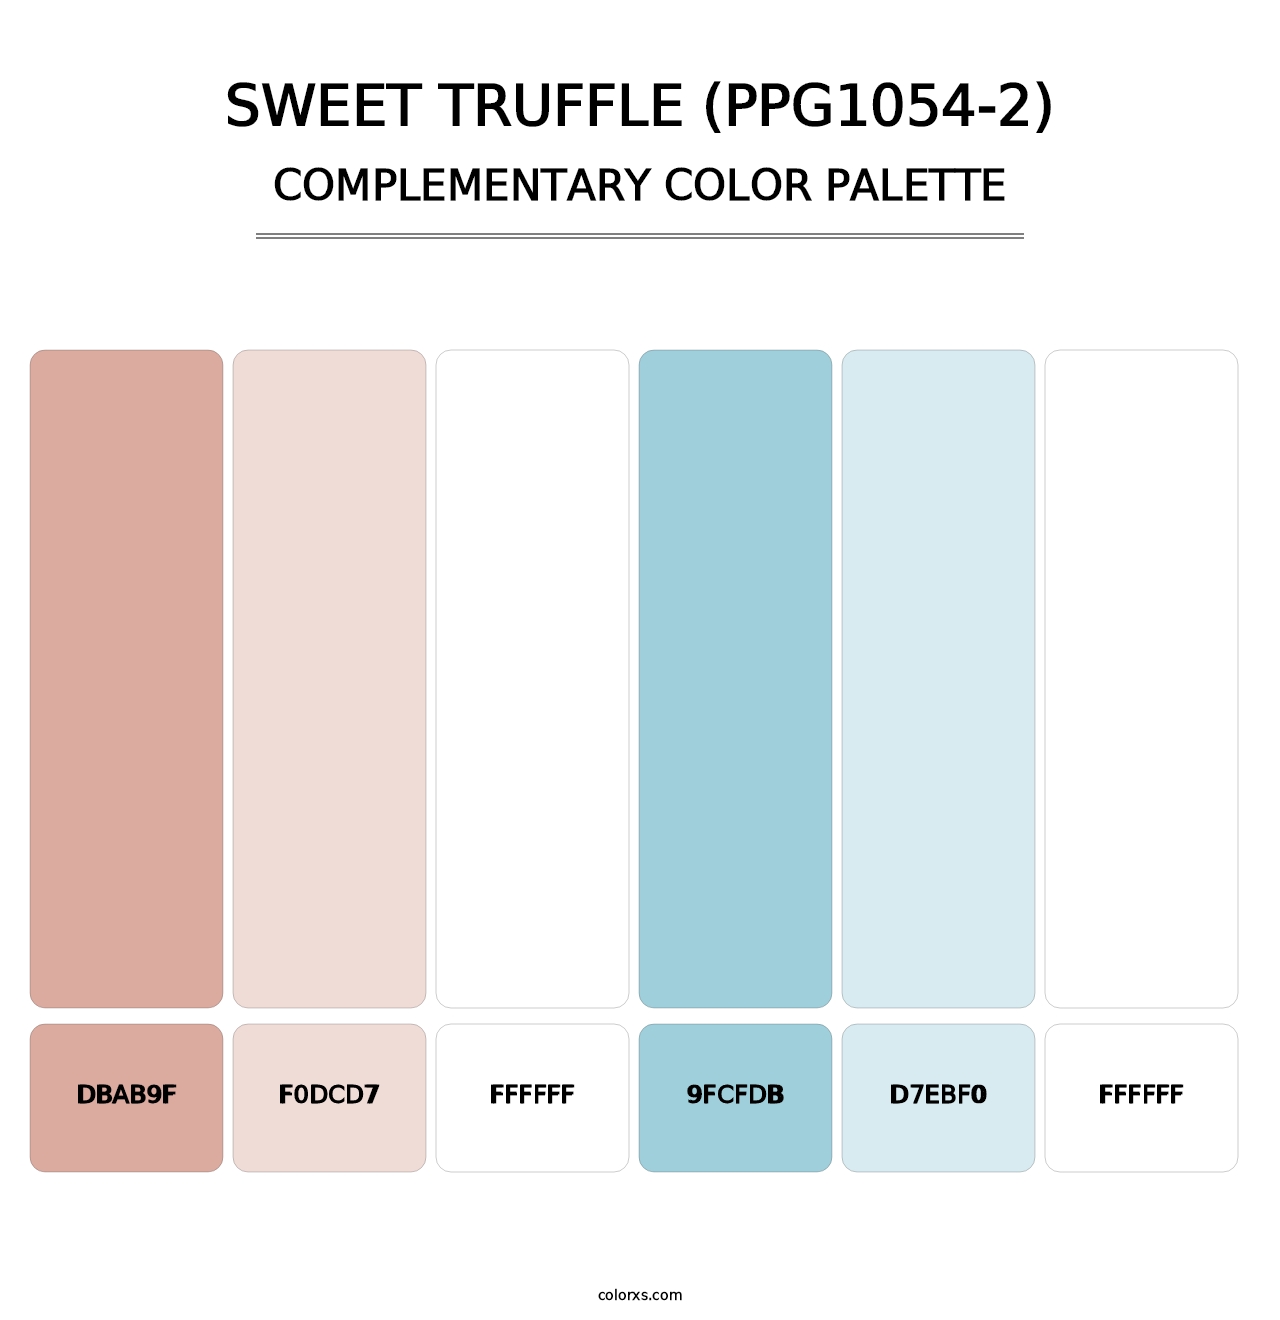 Sweet Truffle (PPG1054-2) - Complementary Color Palette